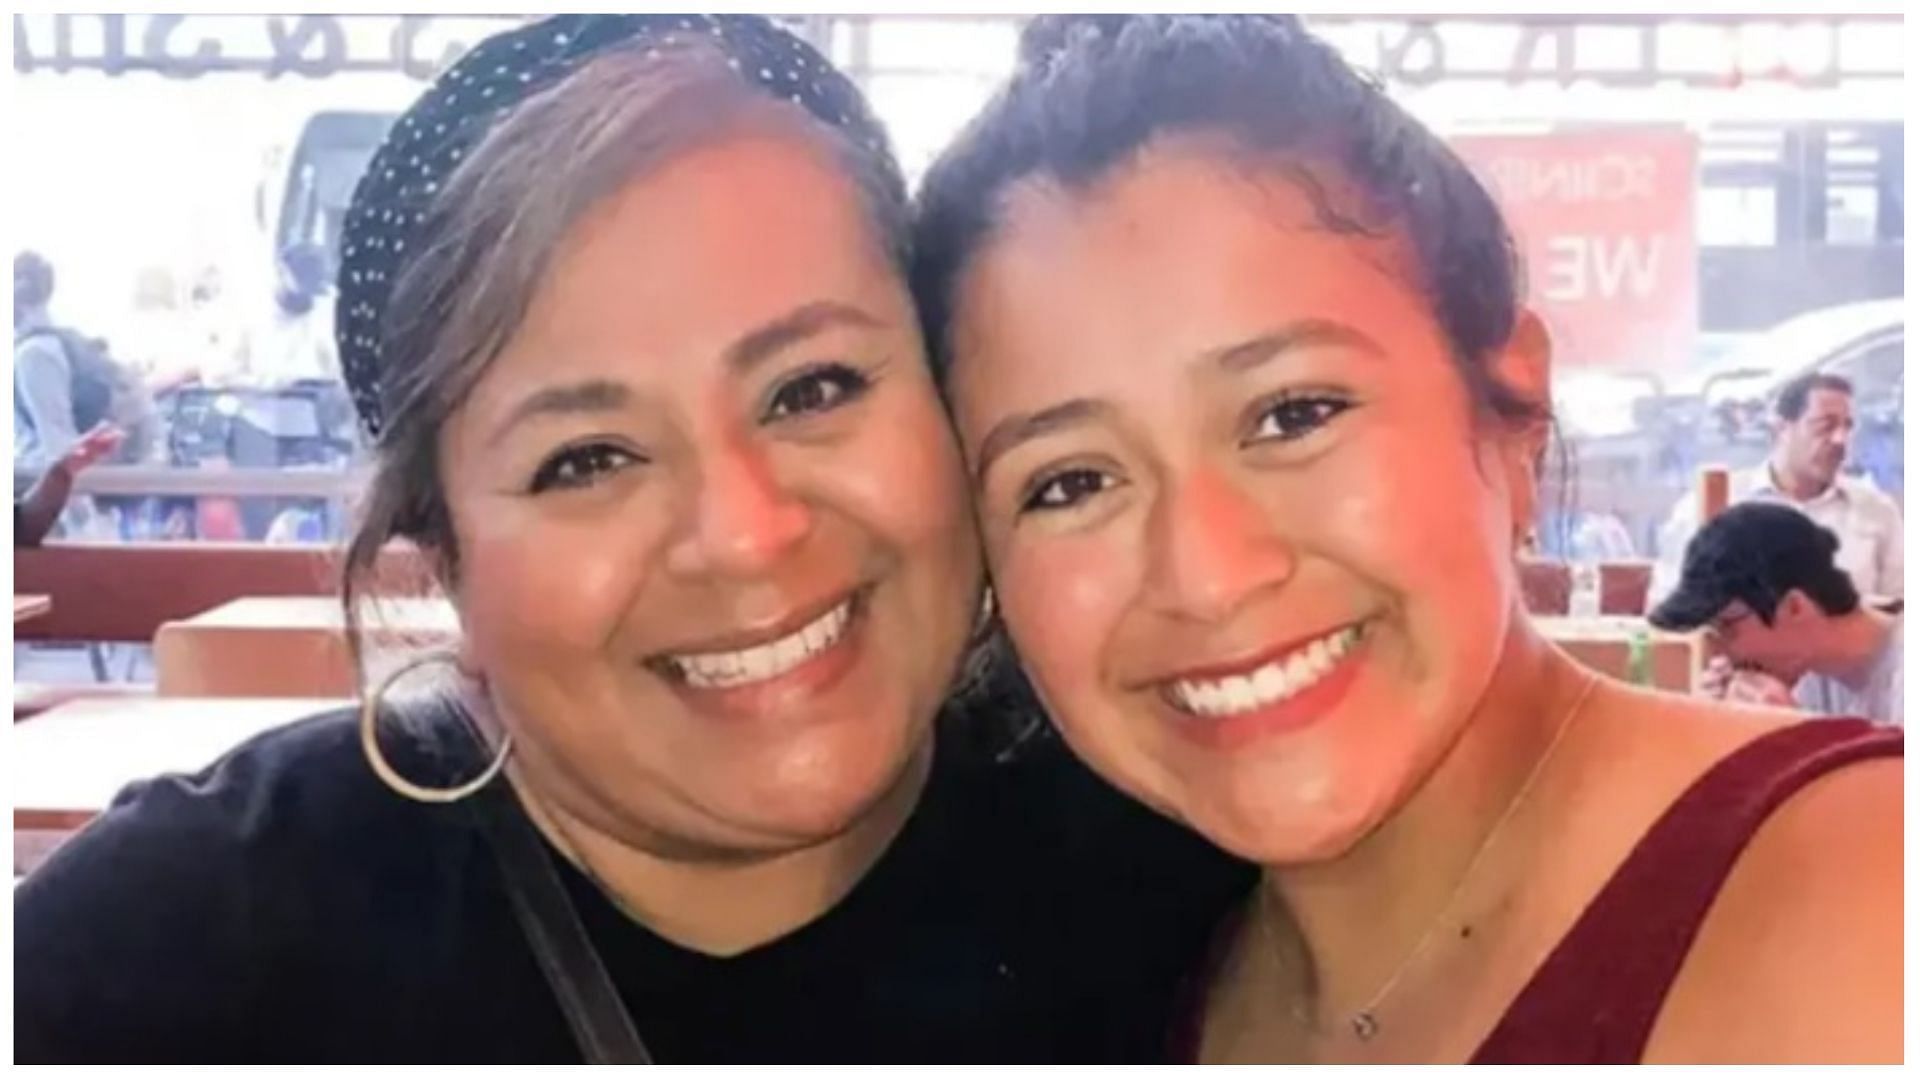 Lori and Natalie Aviles, two victims identified in Texas rampage (Image via GoFundMe)